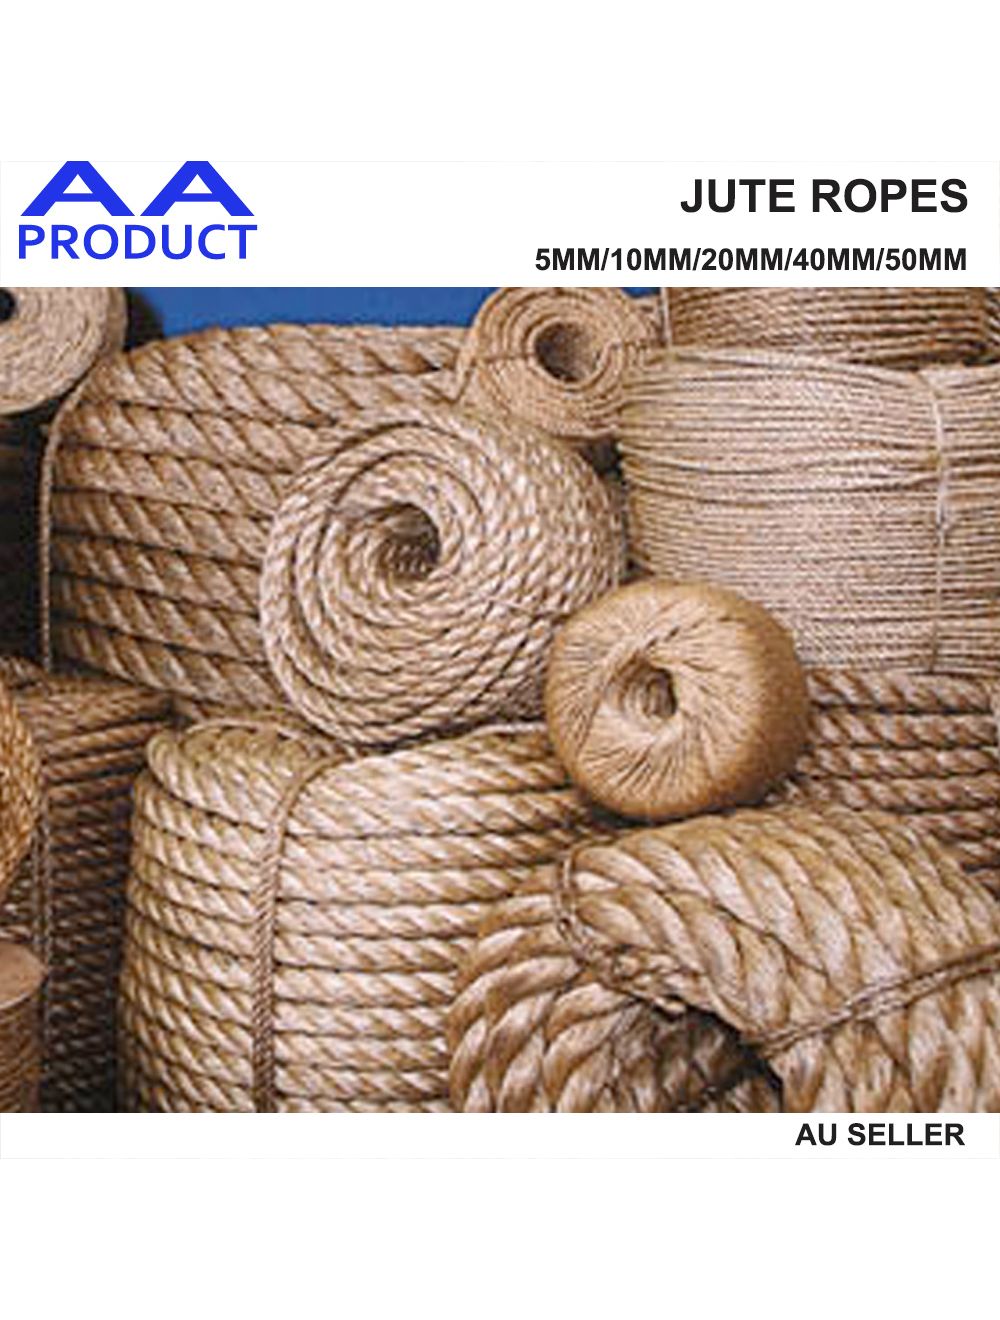 Dody Online Store Natural Jute Rope Burlap Hemp Twine Cord Twisted String 5  10 20 40 50mm Light Duty Heavy Duty Strong Home Decor Art Gardening Decking  Local Pickup, Local Shop, Drop Shipping